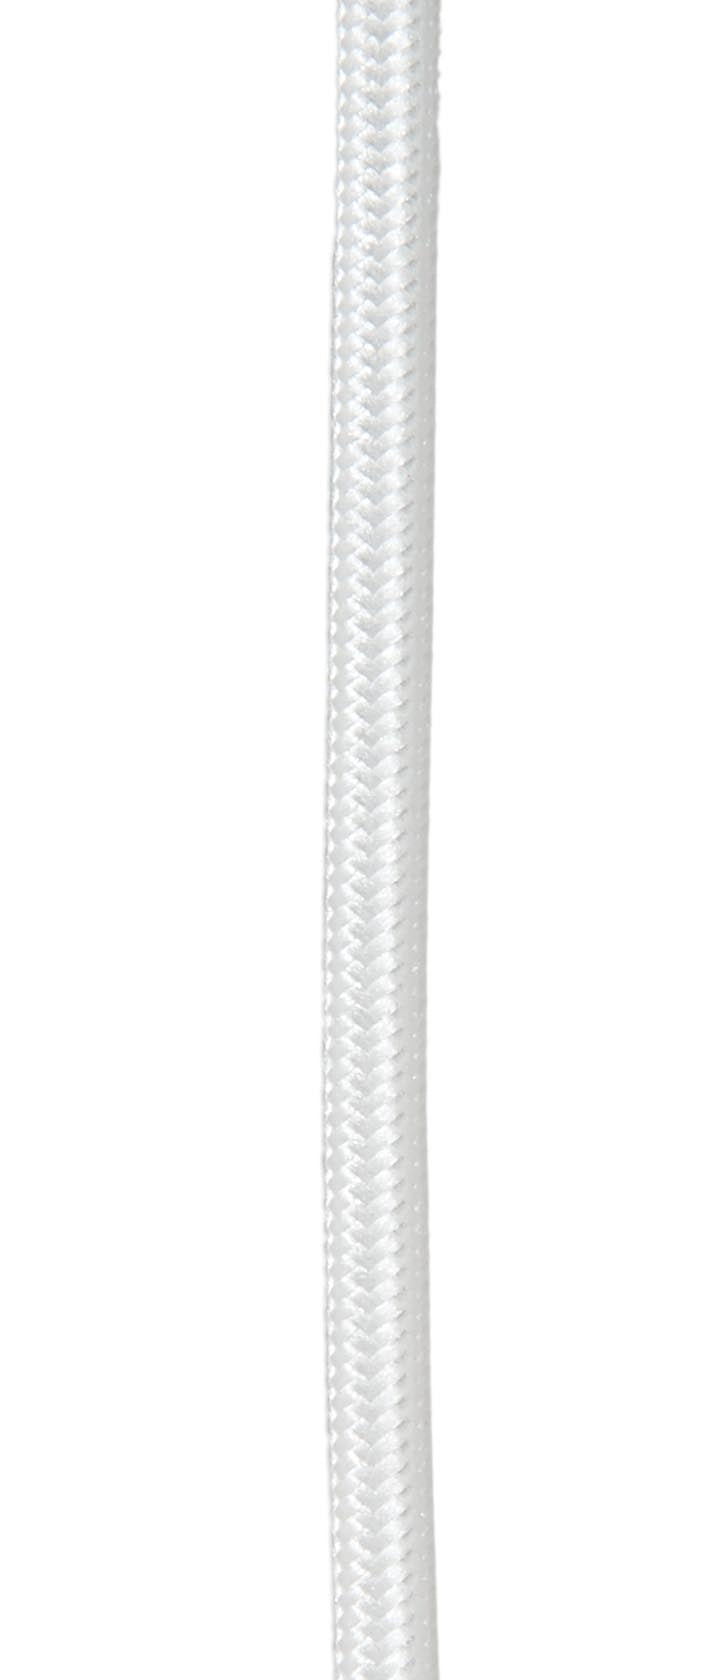 White 18 Gauge SPT-2 Rayon Parallel Lamp Cord, Choice of Length, UL Listed